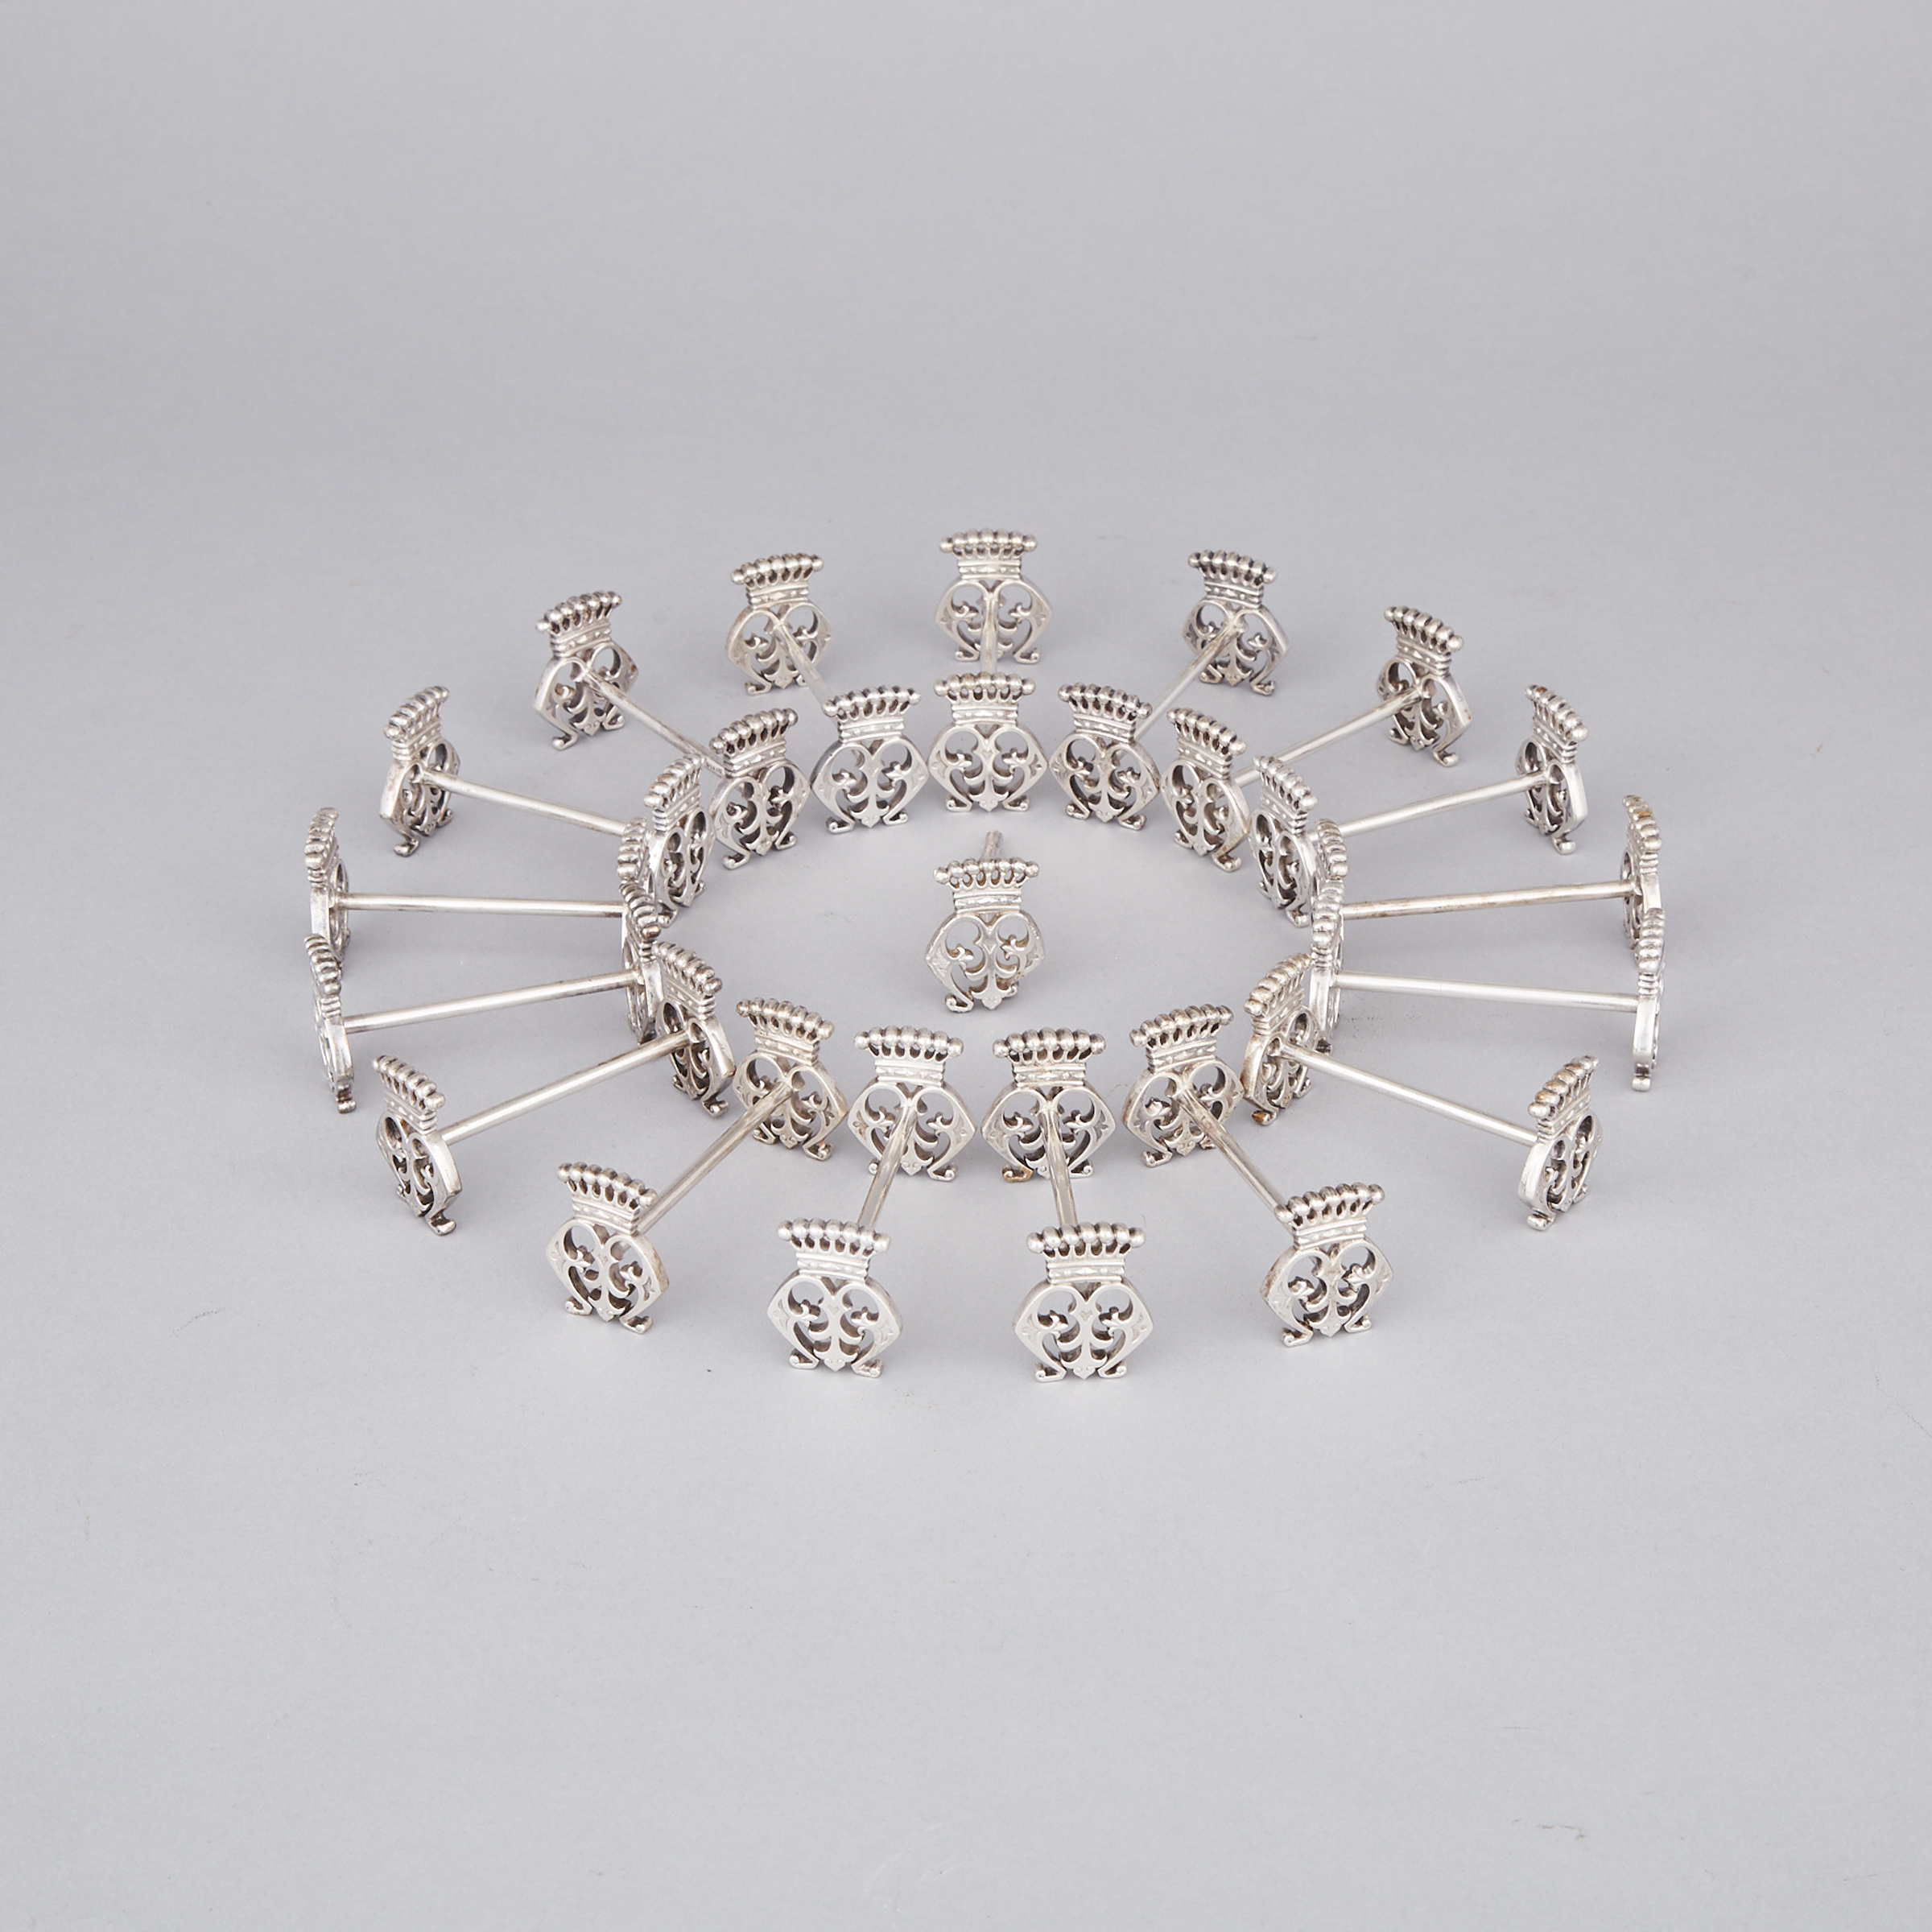 Eighteen German Silver Crowned-Cipher Knife Rests, late 19th/early 20th century